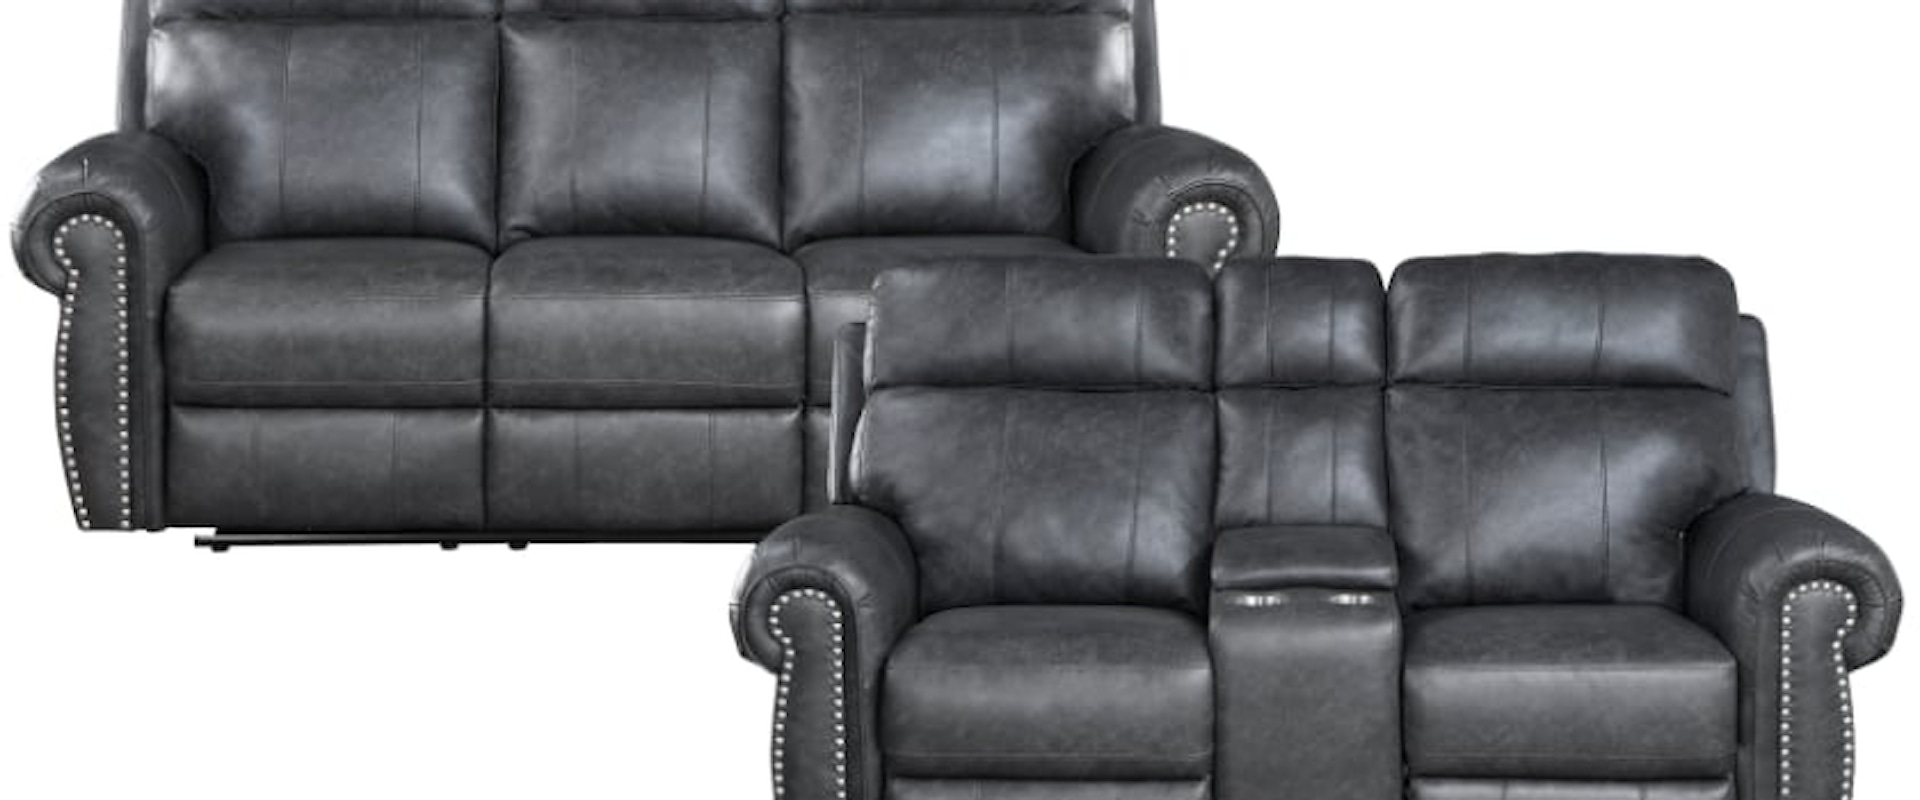 Transitional 2-Piece Reclining Living Room Set with Rolled Arms and Nailhead Trimming